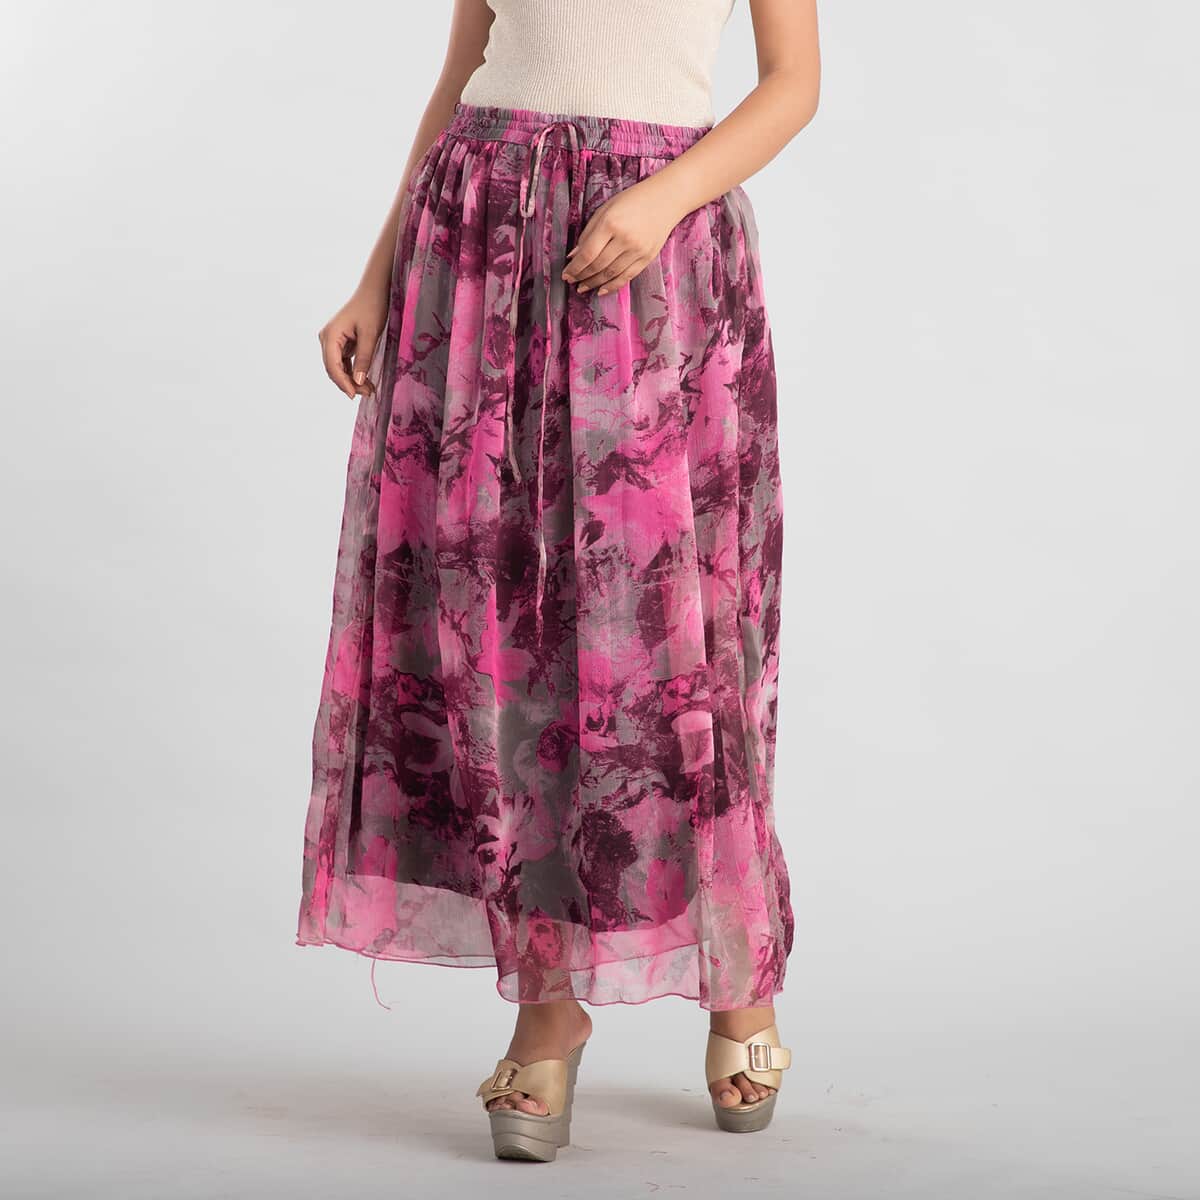 Jovie Light Purple Floral Printed Skirt for Women with Drawstring - One Size Fits Most | Long Skirt | Summer Skirts | Women Skirt image number 0